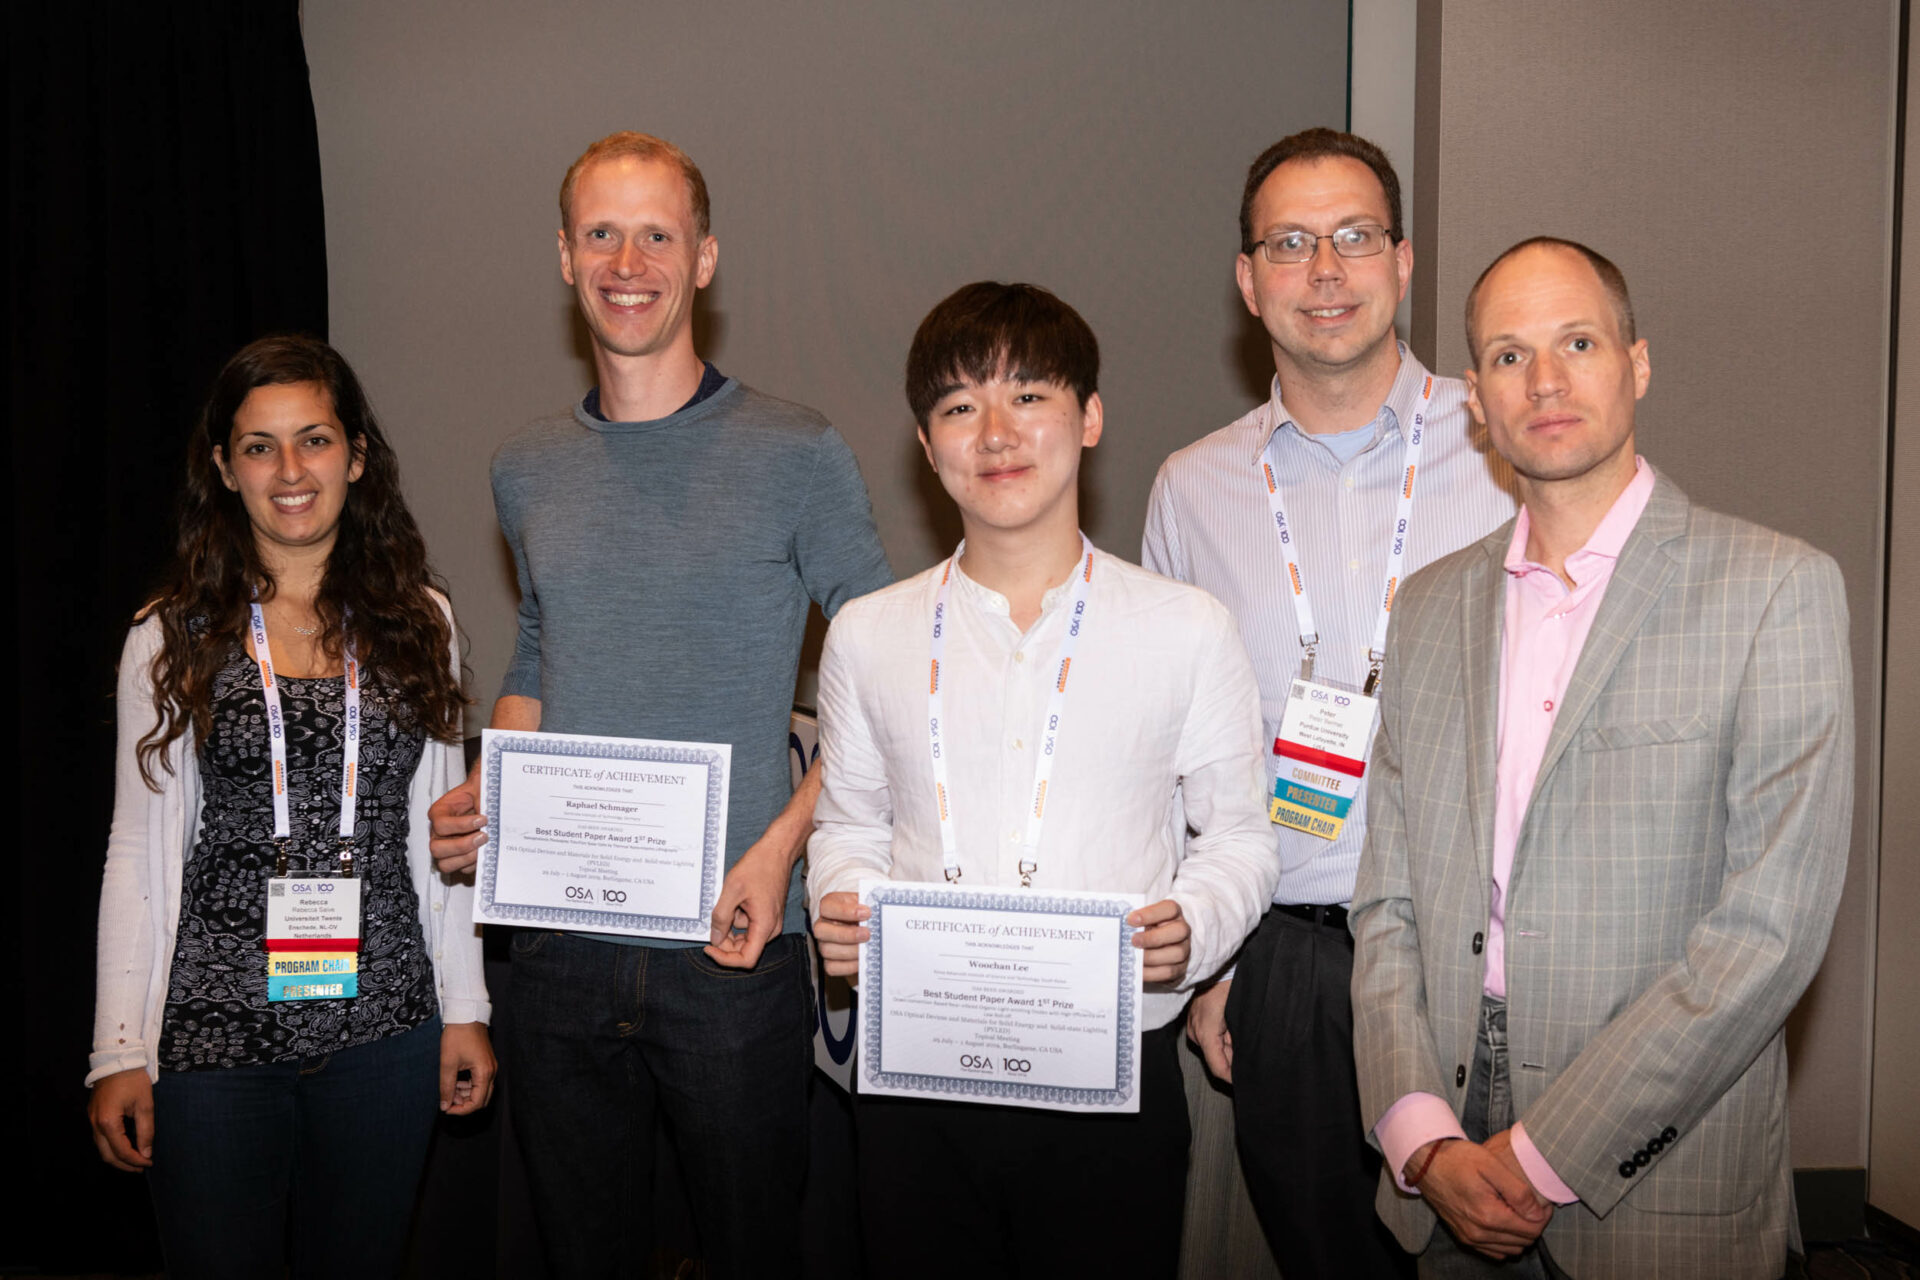 Ph.D student Woo Chan Lee(Advised by Seung-Hyup Yoo) won the Best Student Paper Award 1st Prize at the OSA Advanced Photonics Congress 2019